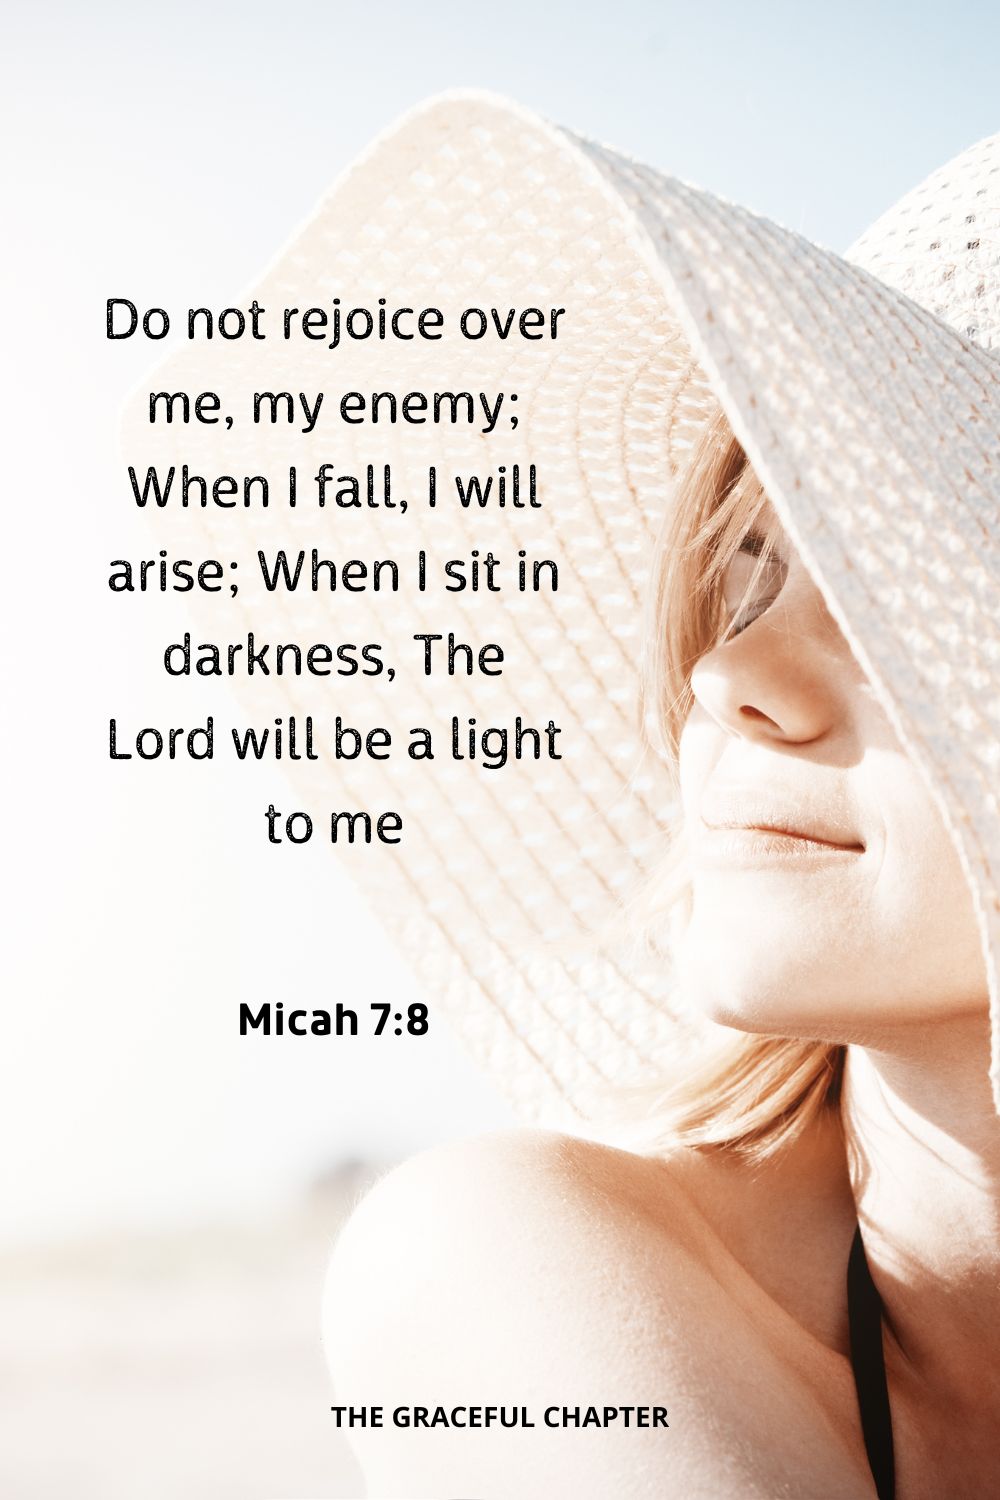 Do not rejoice over me, my enemy; When I fall, I will arise; When I sit in darkness, The Lord will be a light to me